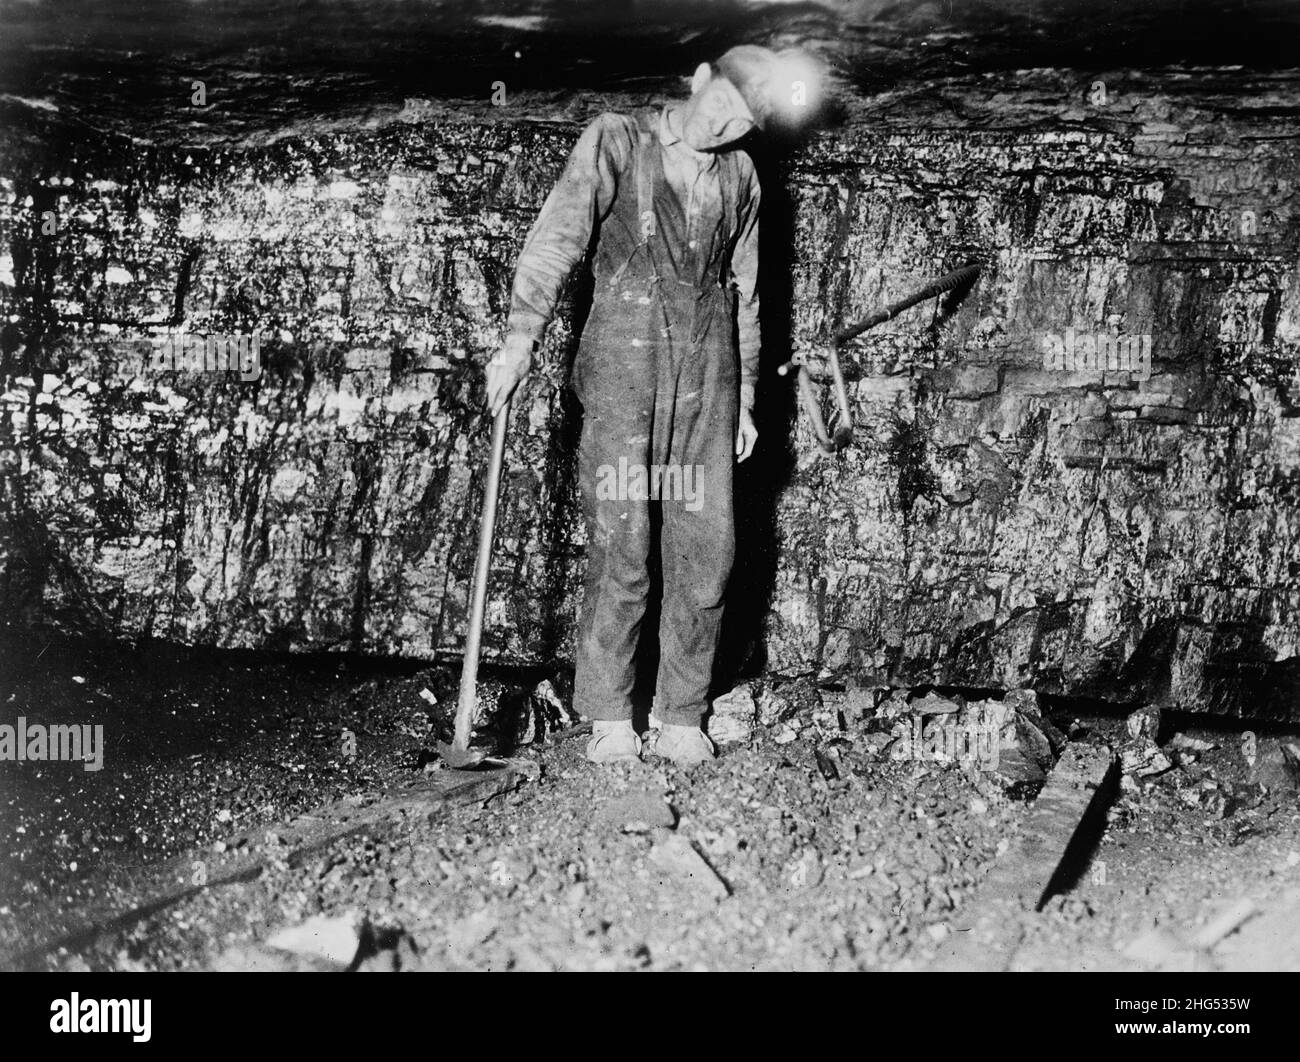 Coal miner in an American coal mine circa 1910 showing the dirty and cramped conditions they worked in Stock Photo